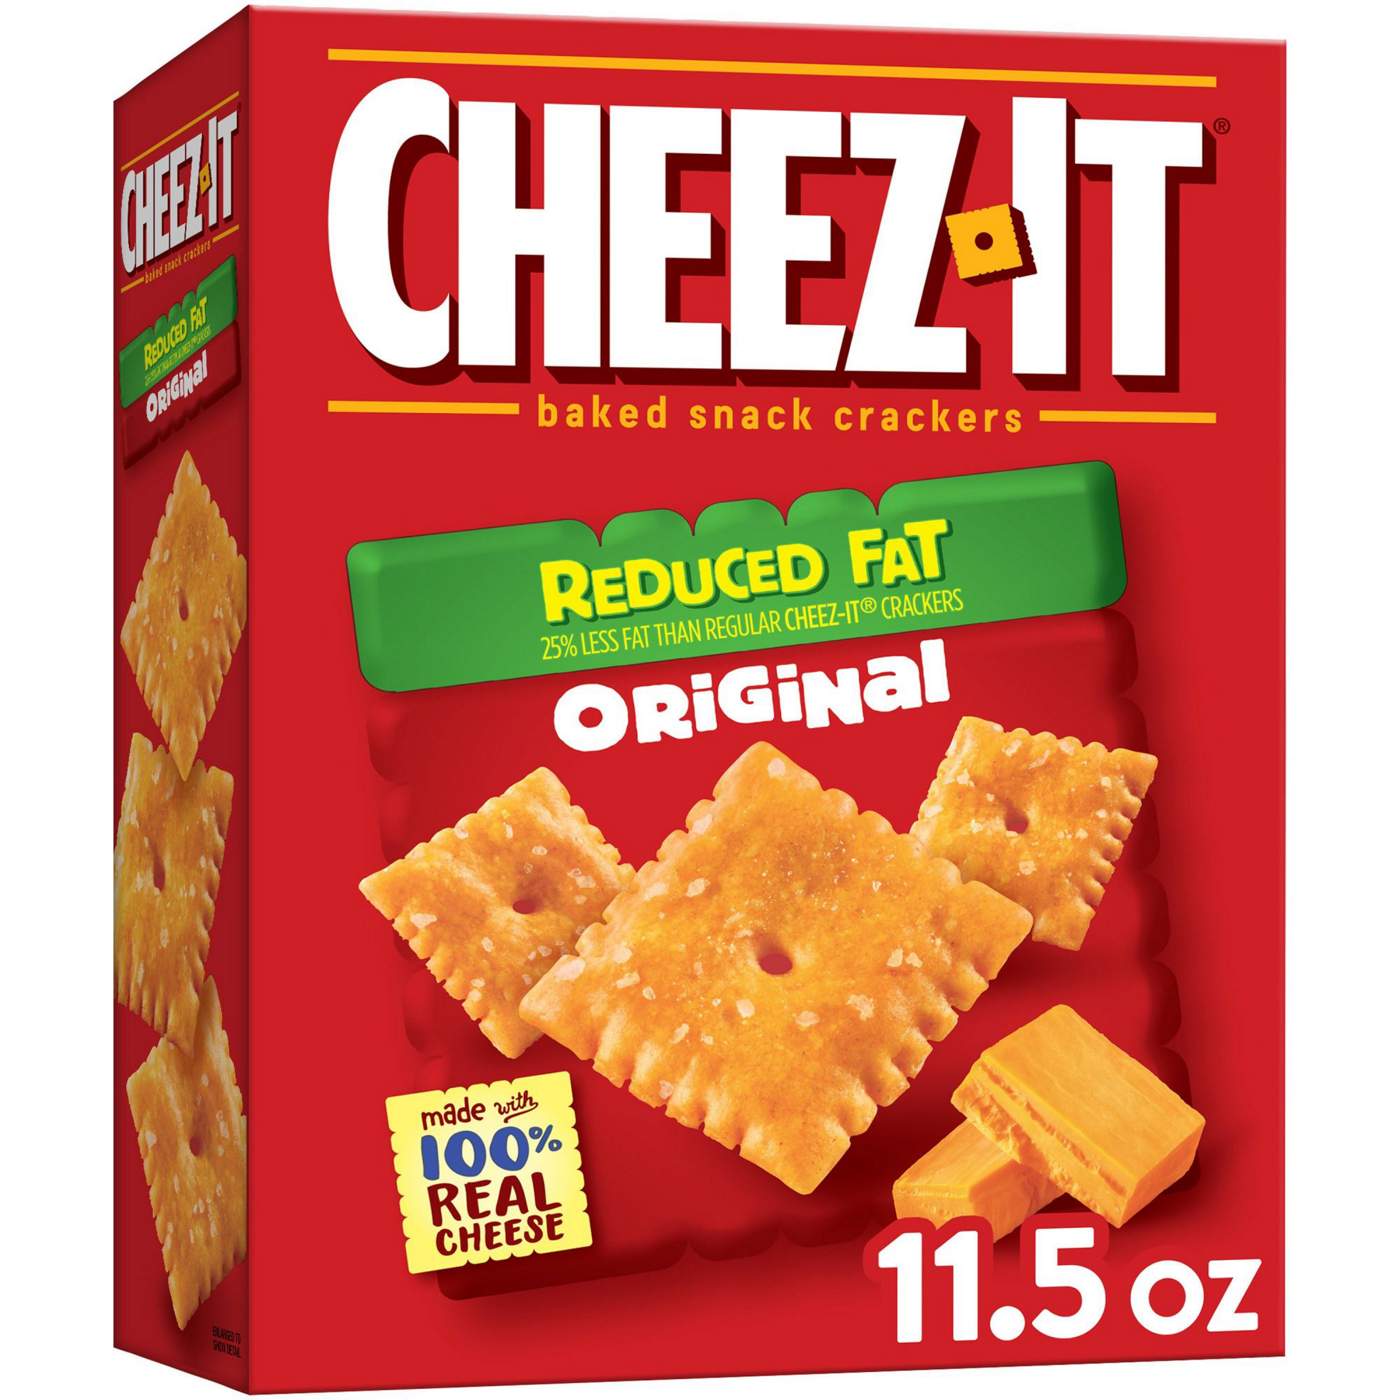 Cheez-It Reduced Fat Original Baked Snack Cheese Crackers; image 6 of 6